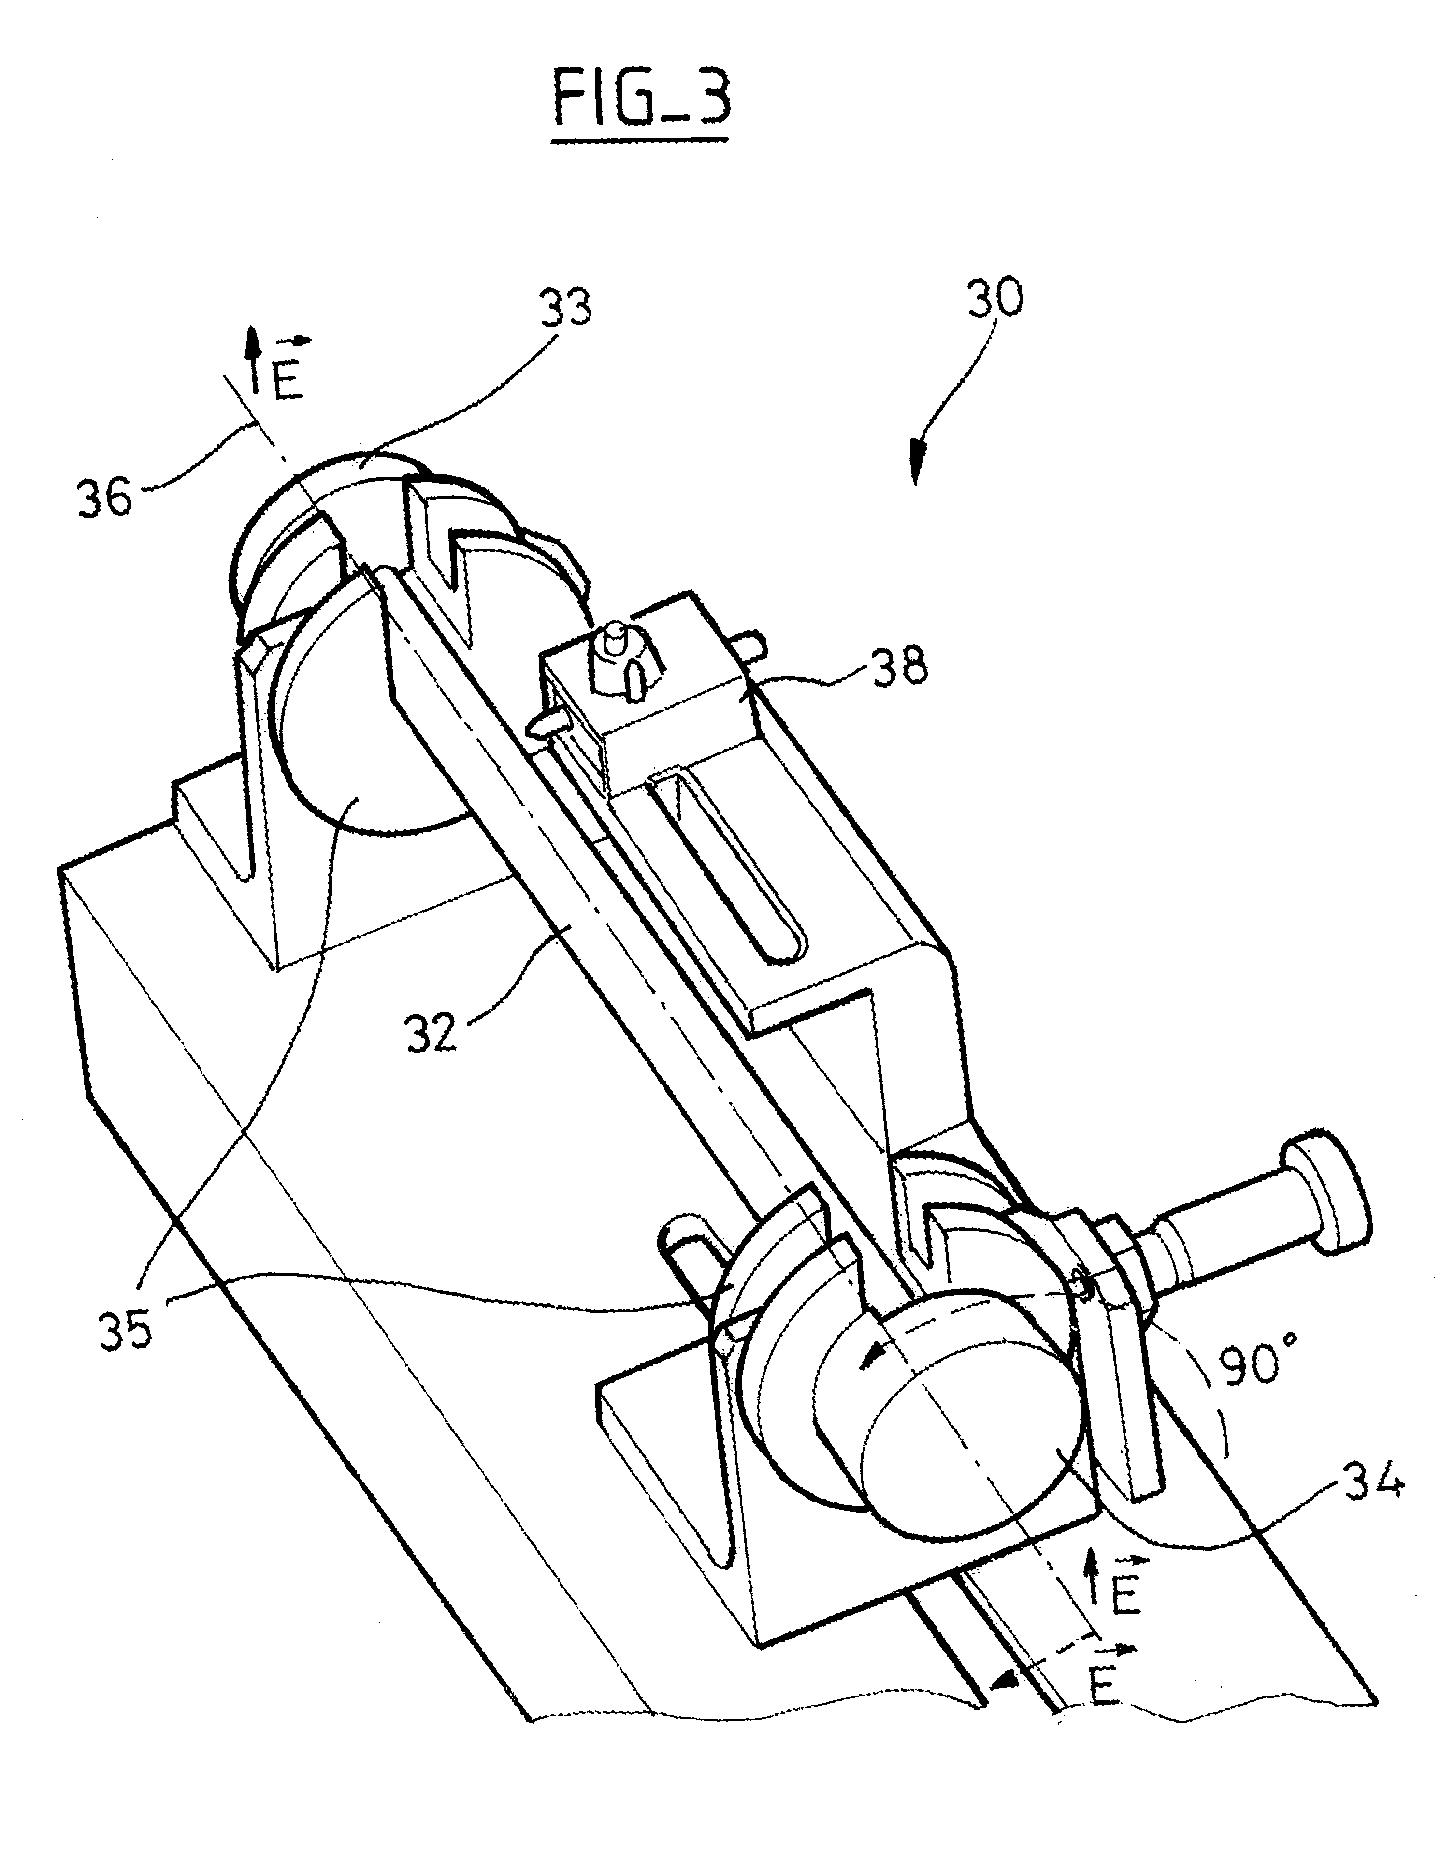 Method of assembling a radiocommunication antenna, radiocommunication antenna assembled by such a method, and device adapted to implement such an assembly method